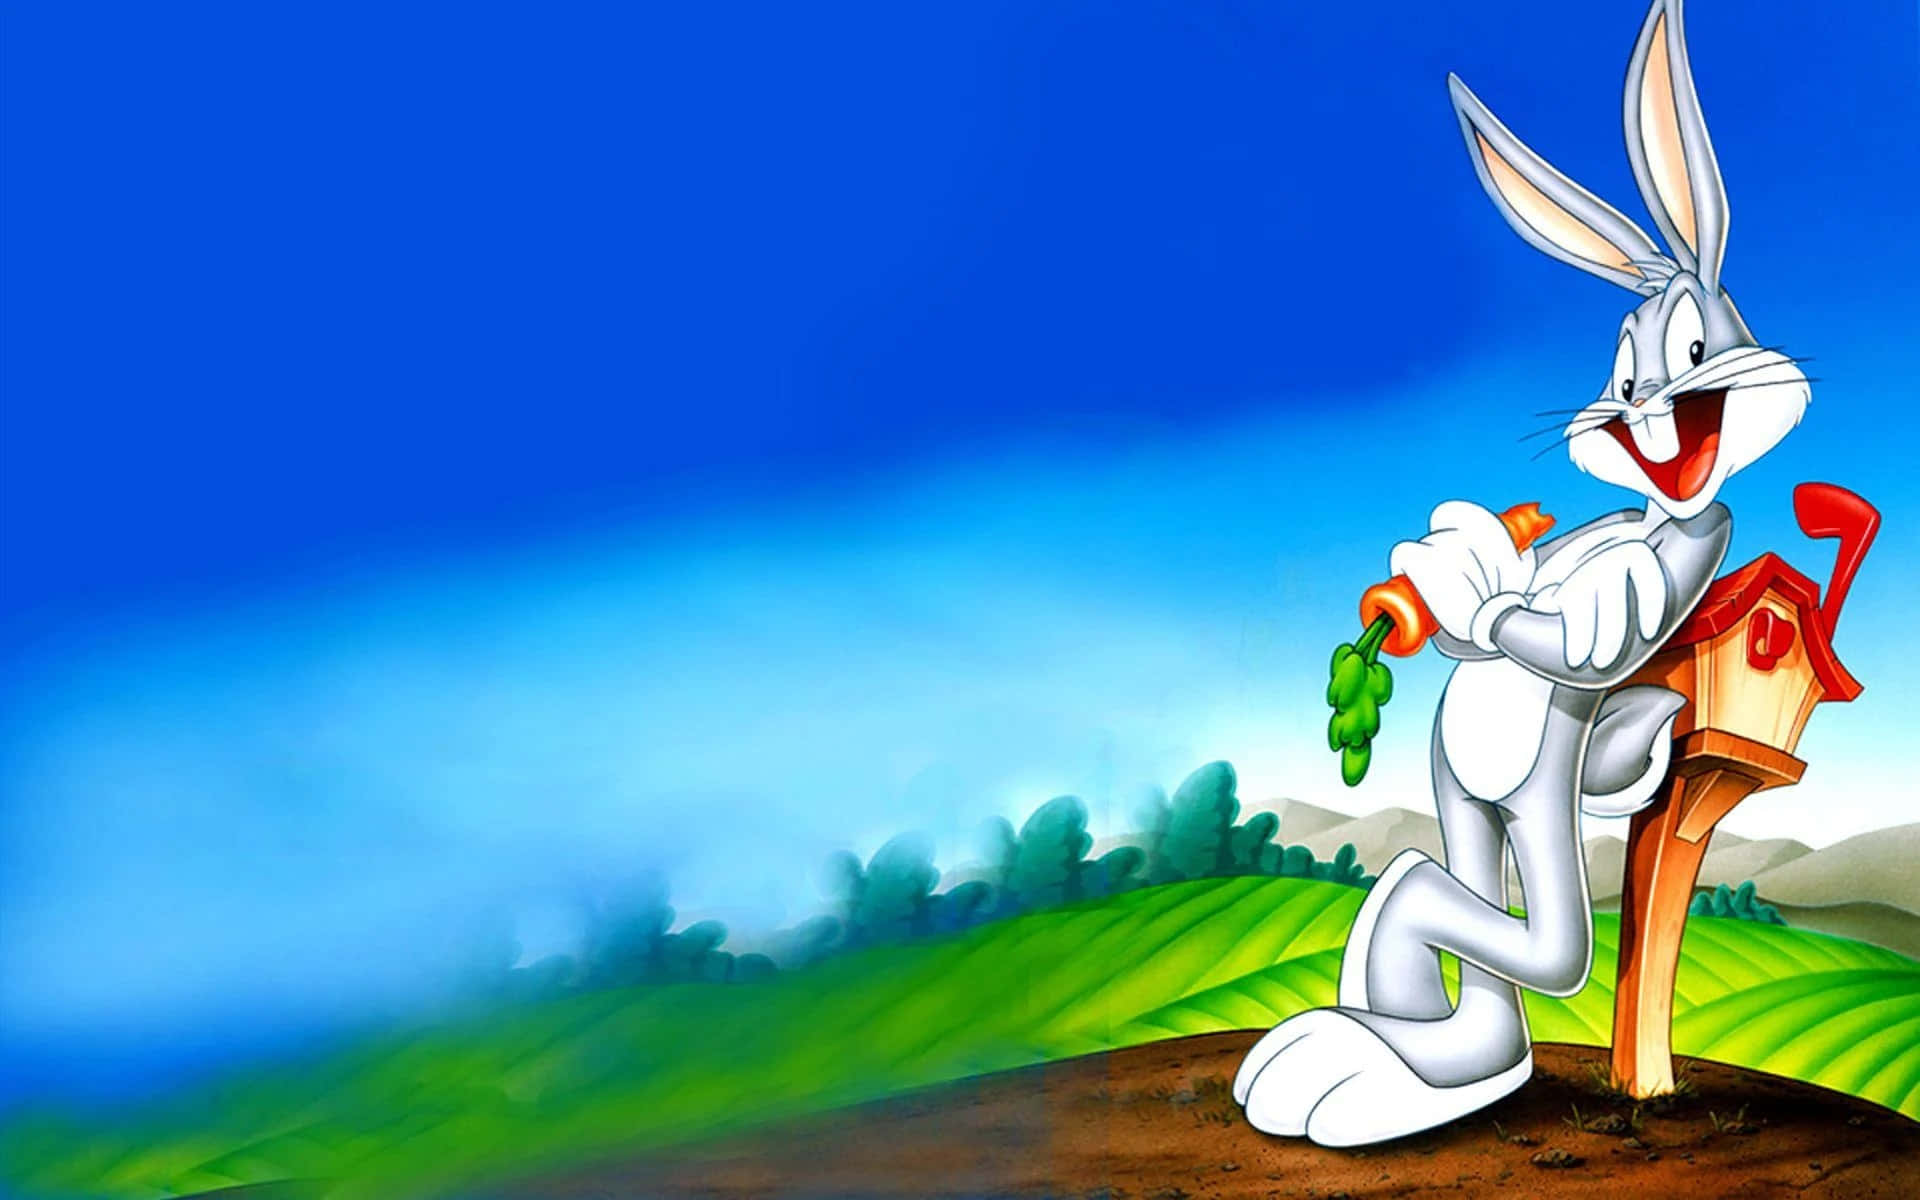 Bugs Bunny, the cheeky and beloved cartoon character